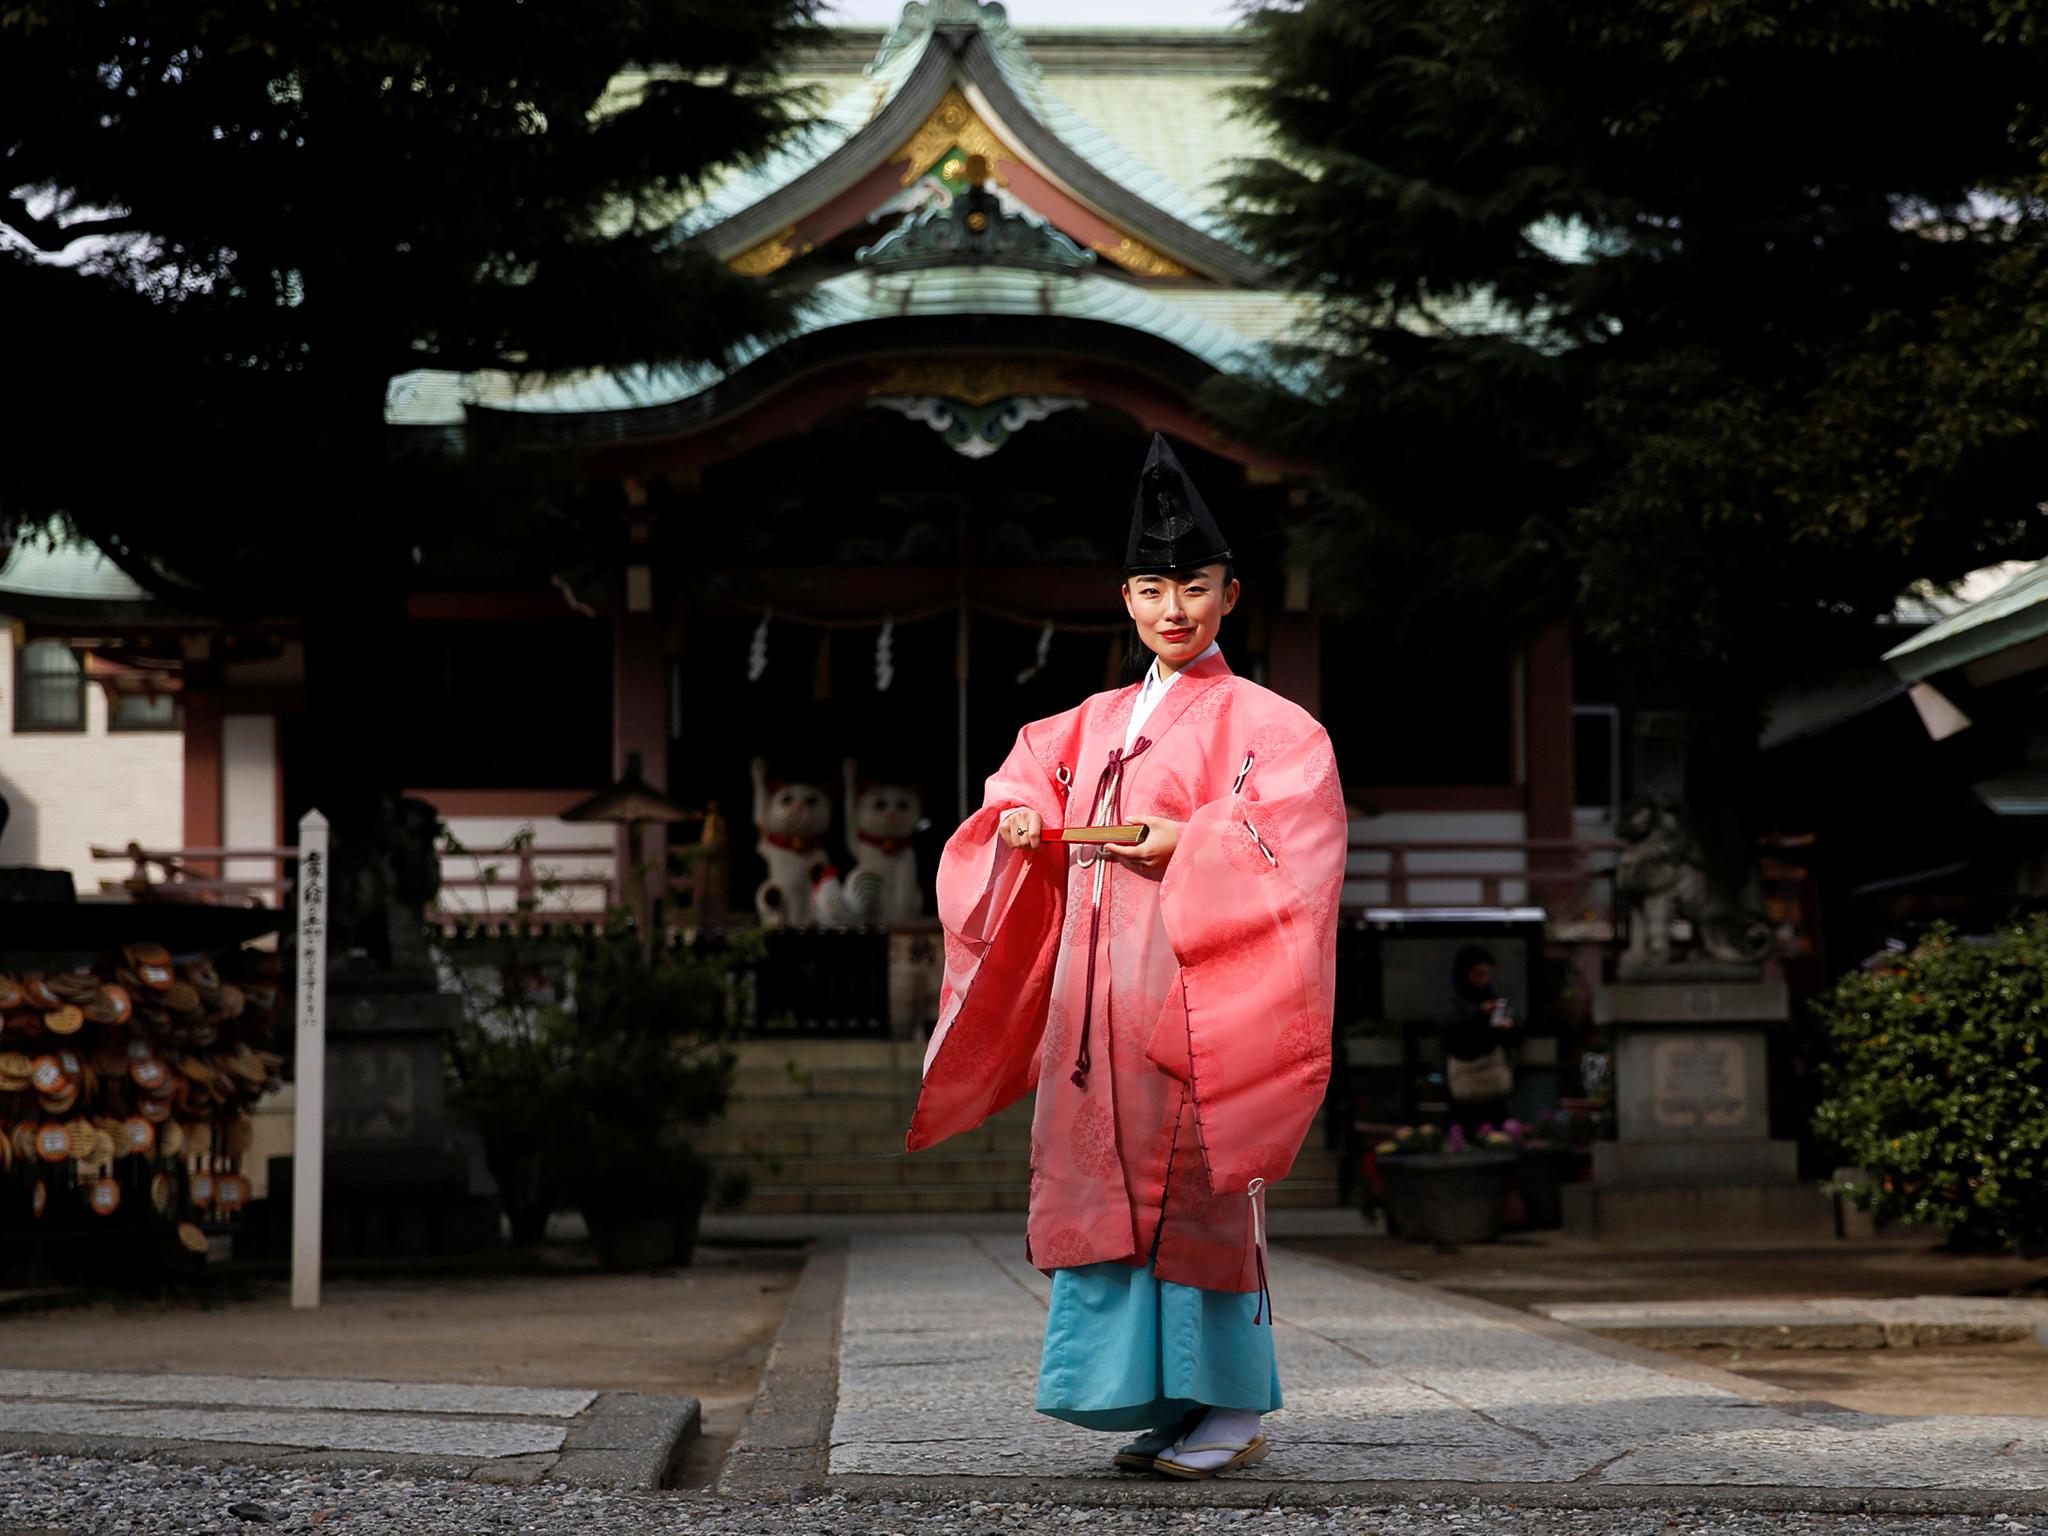 Shinto priest Tomoe Ichino: 'I decided to be proud of the fact that I am a female priest and I began wearing a pink robe, like today'